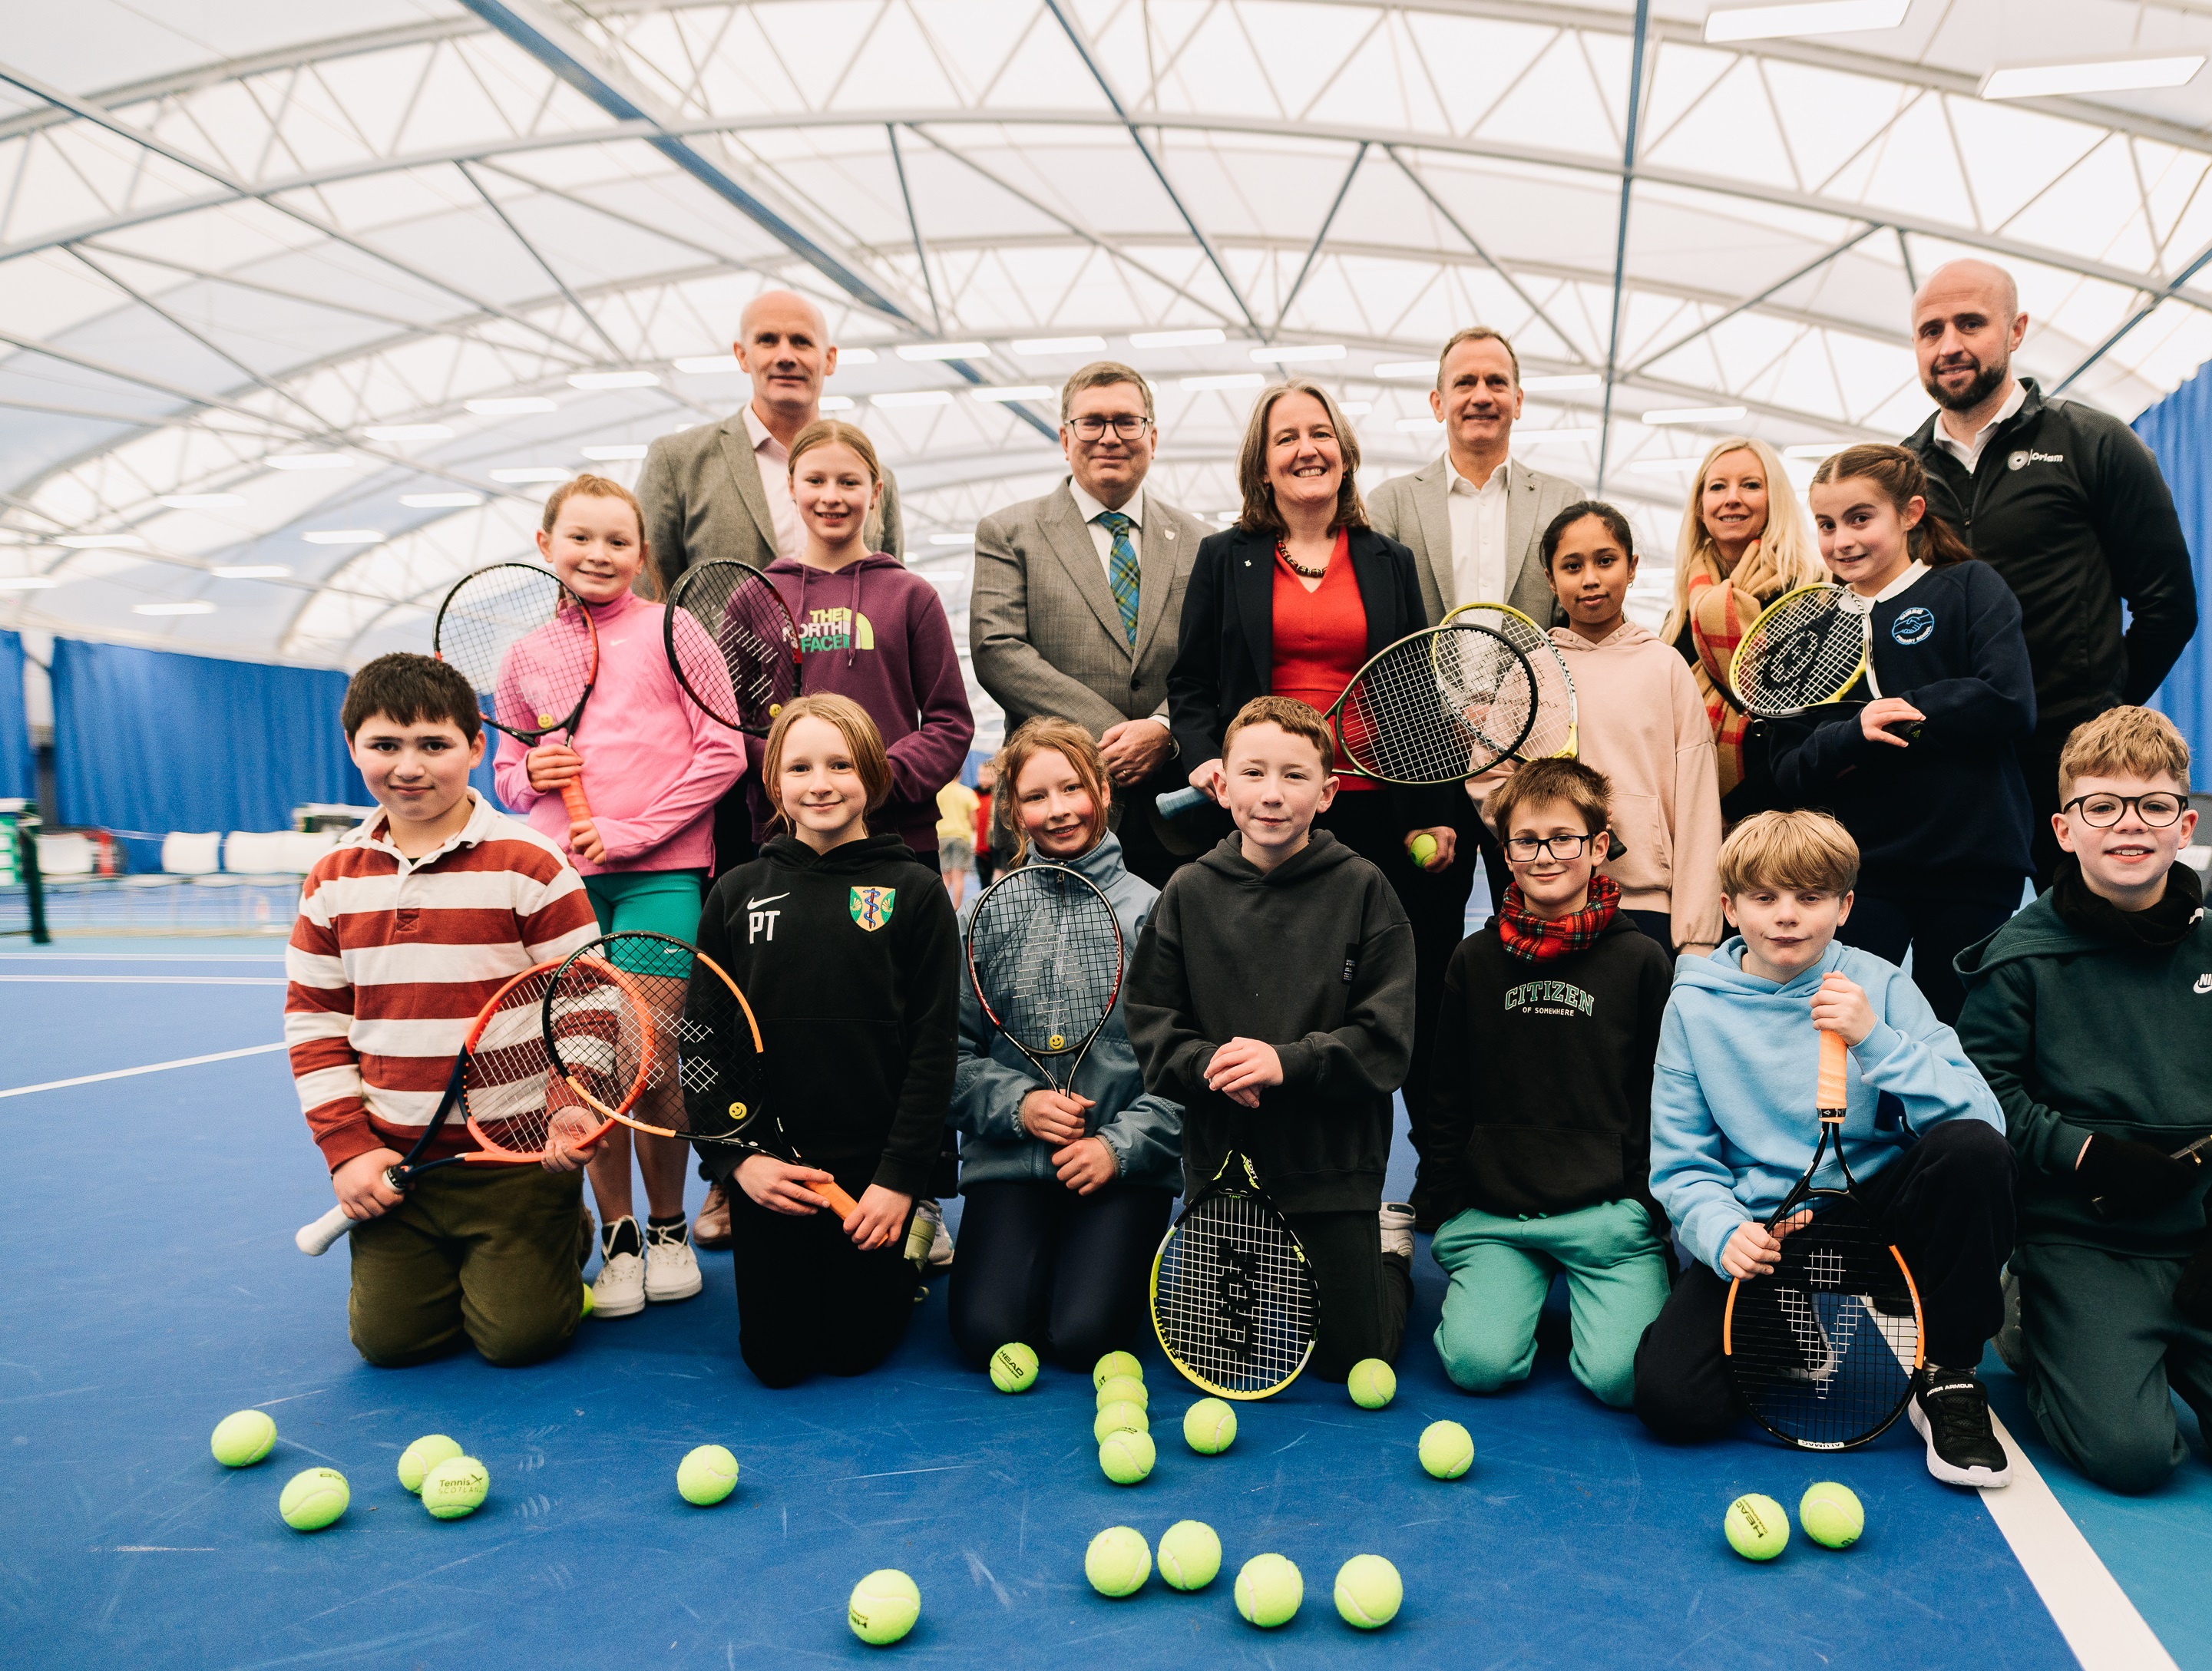 Oriam Indoor Tennis Centre officially opened